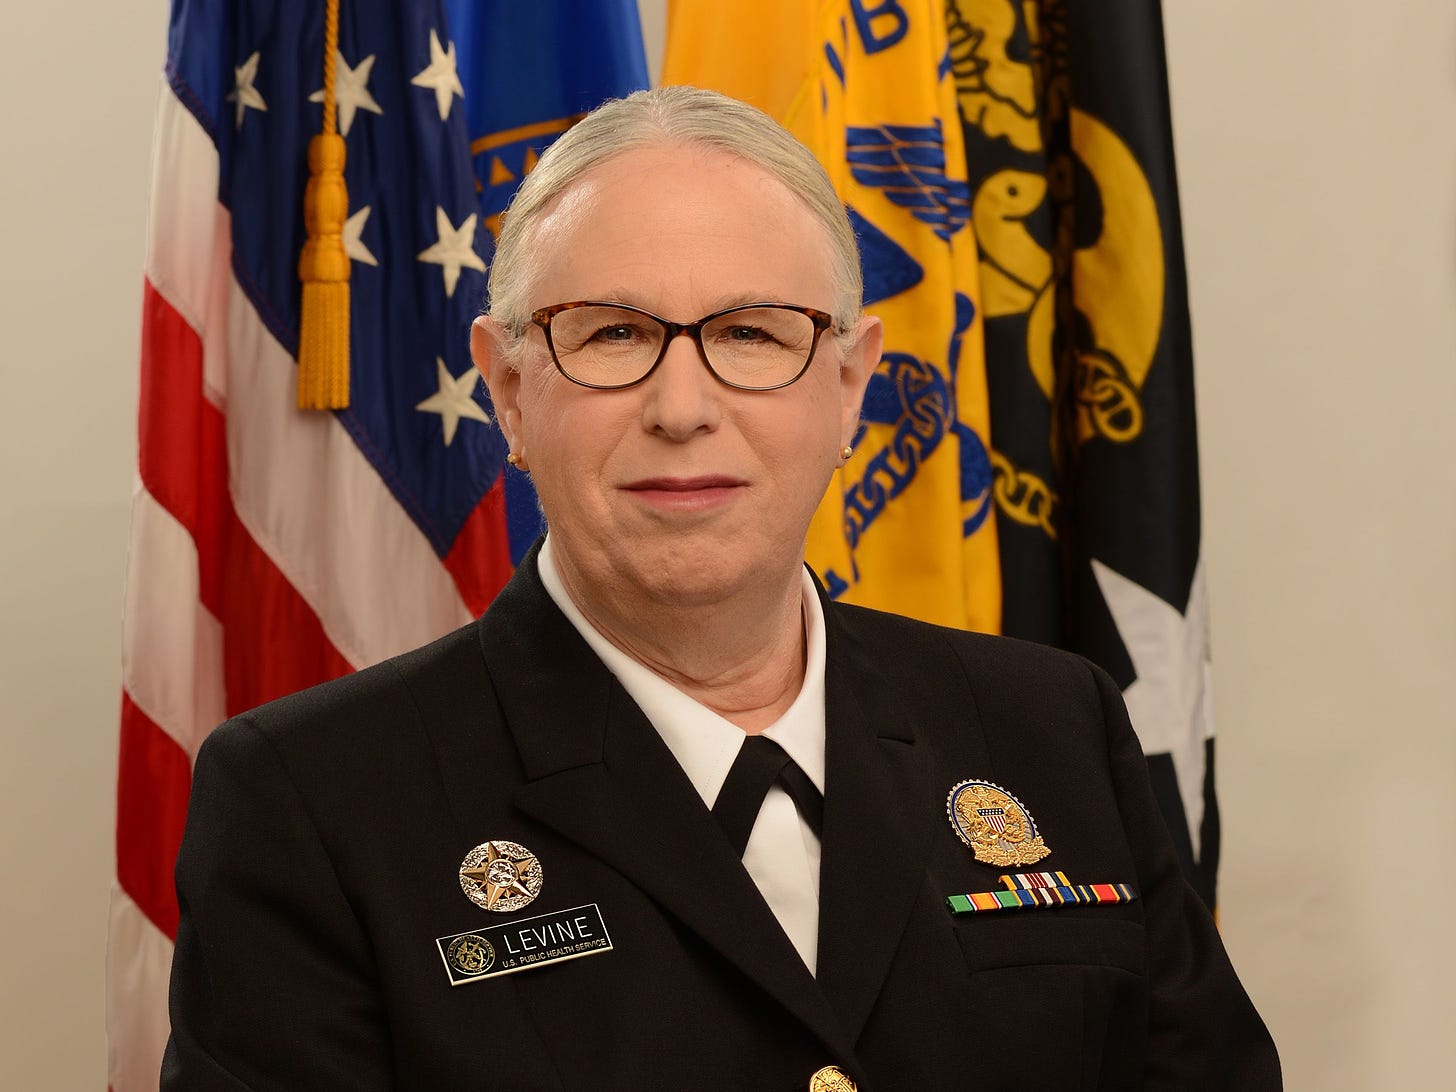 Rachel Levine, openly transgender health official, sworn in as four-star  admiral in Public Health Service - The Washington Post